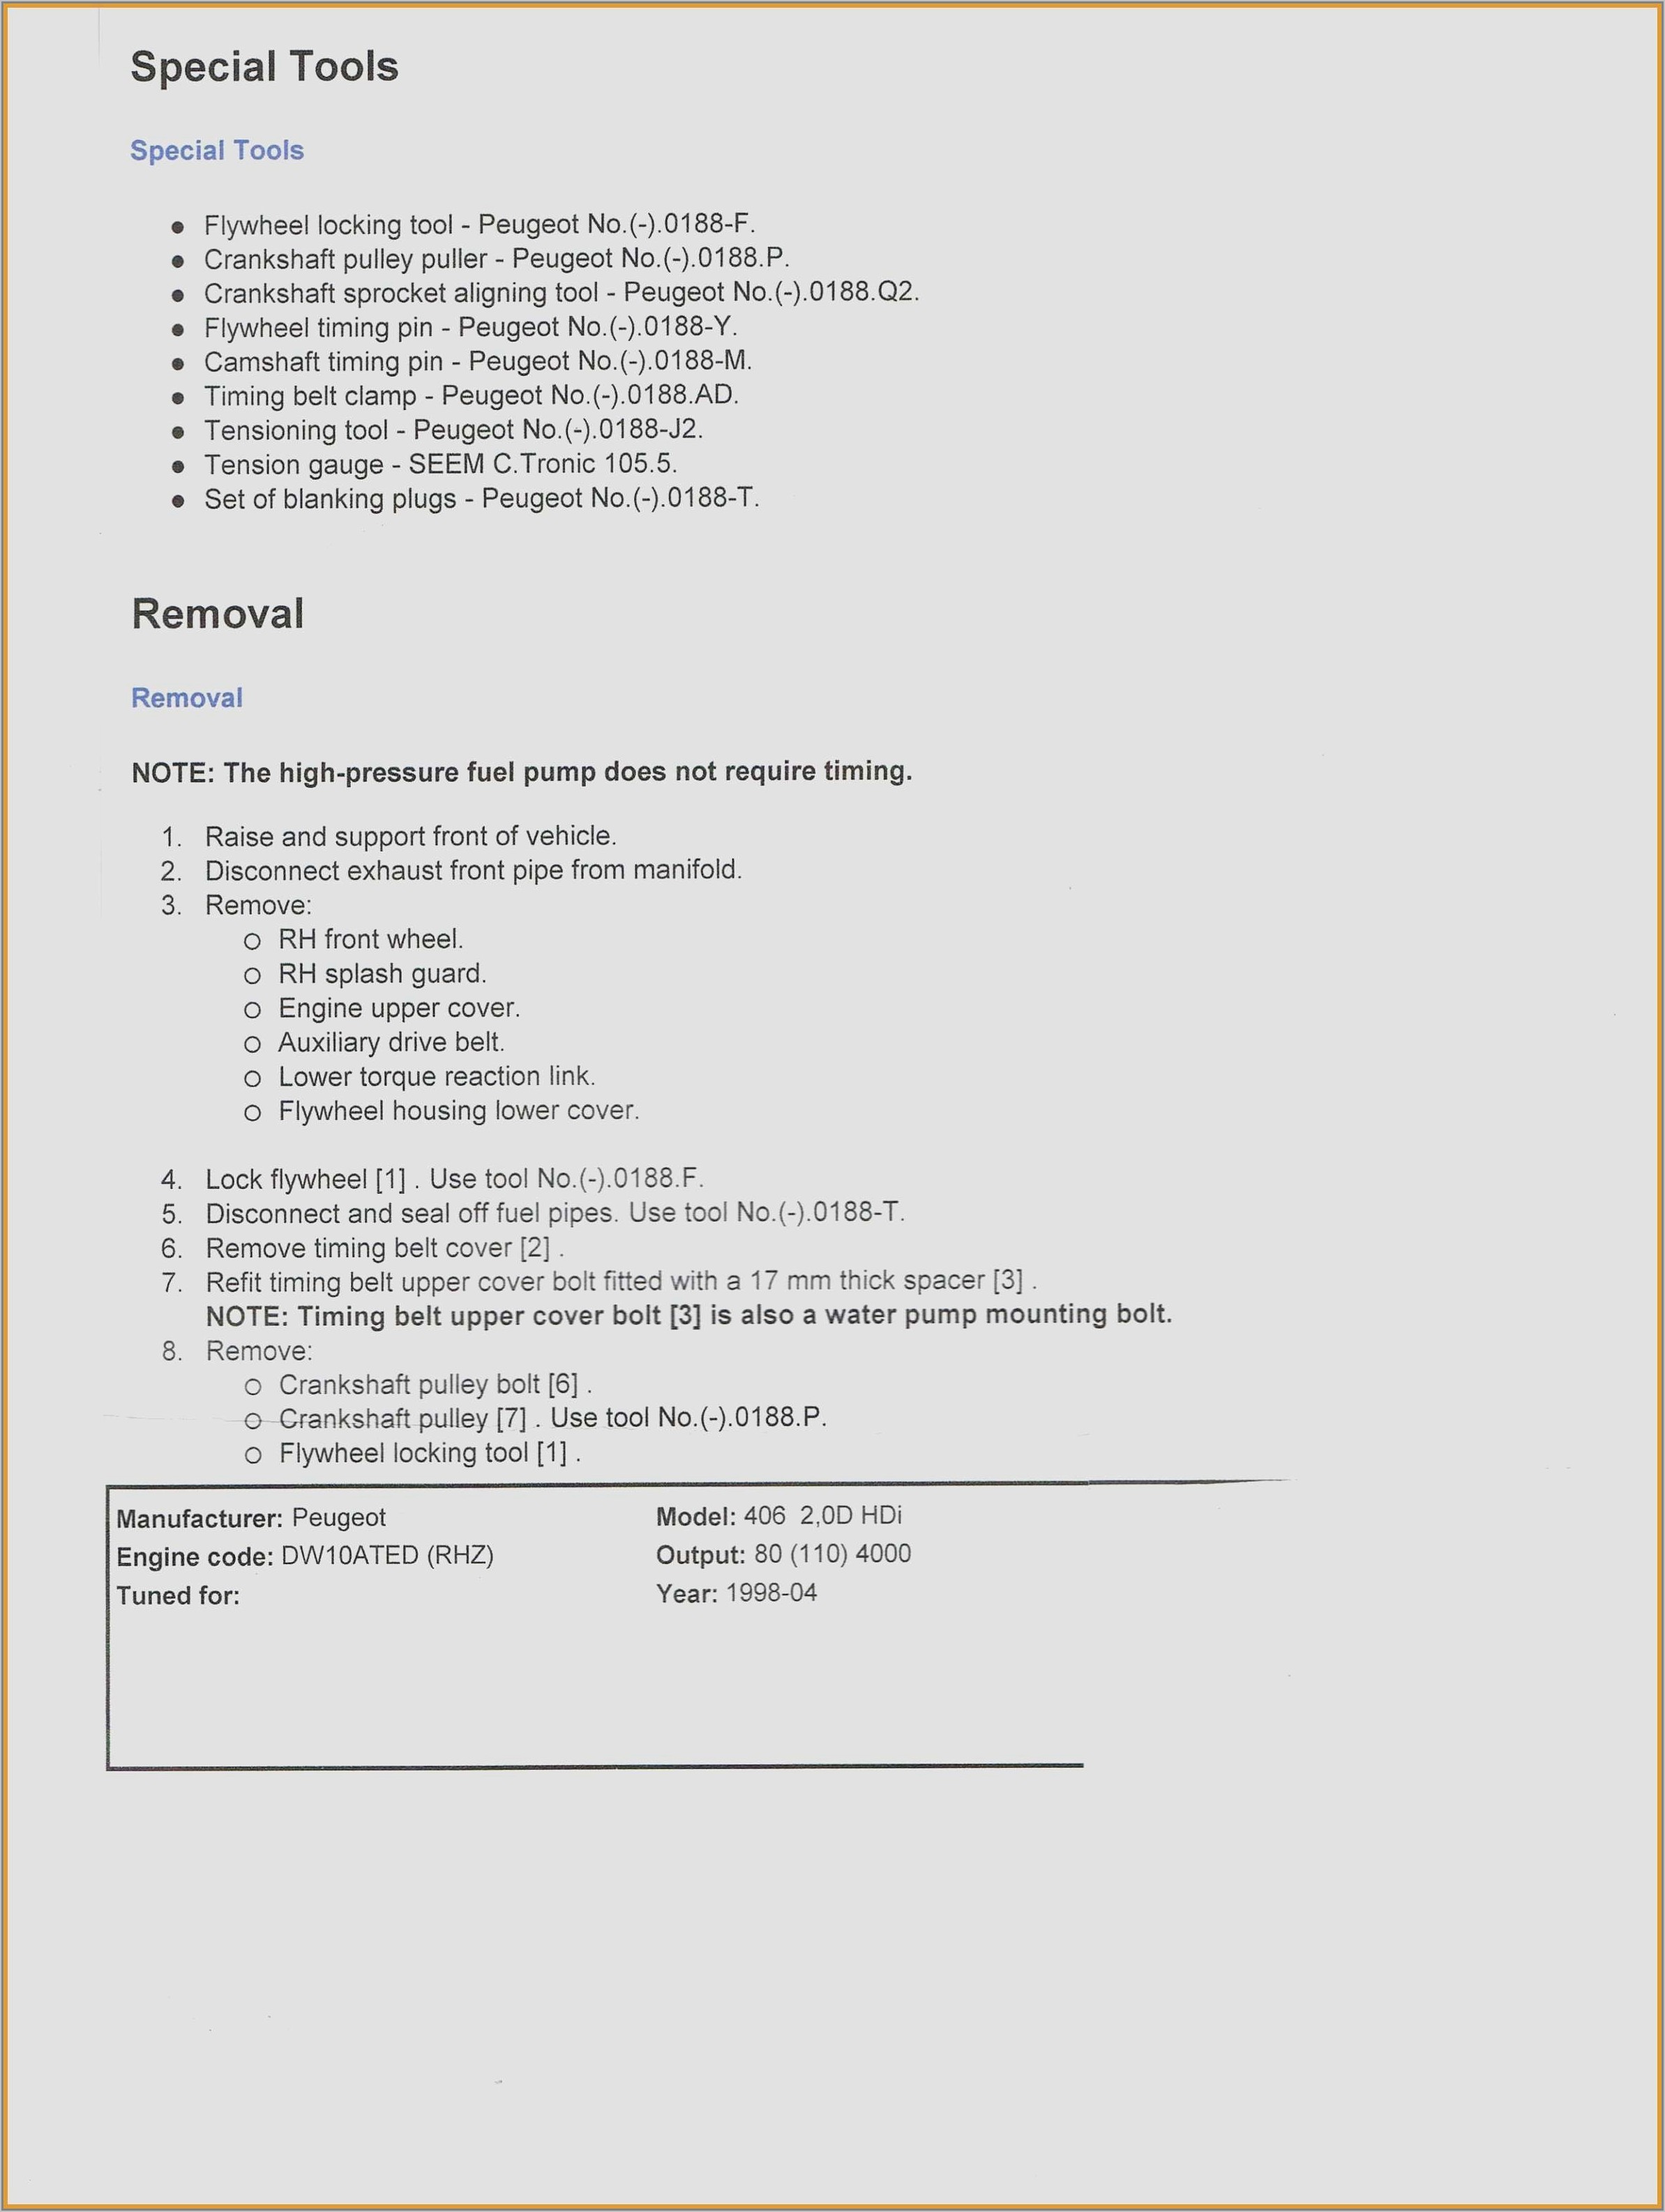 Sample Resume Templates In Word